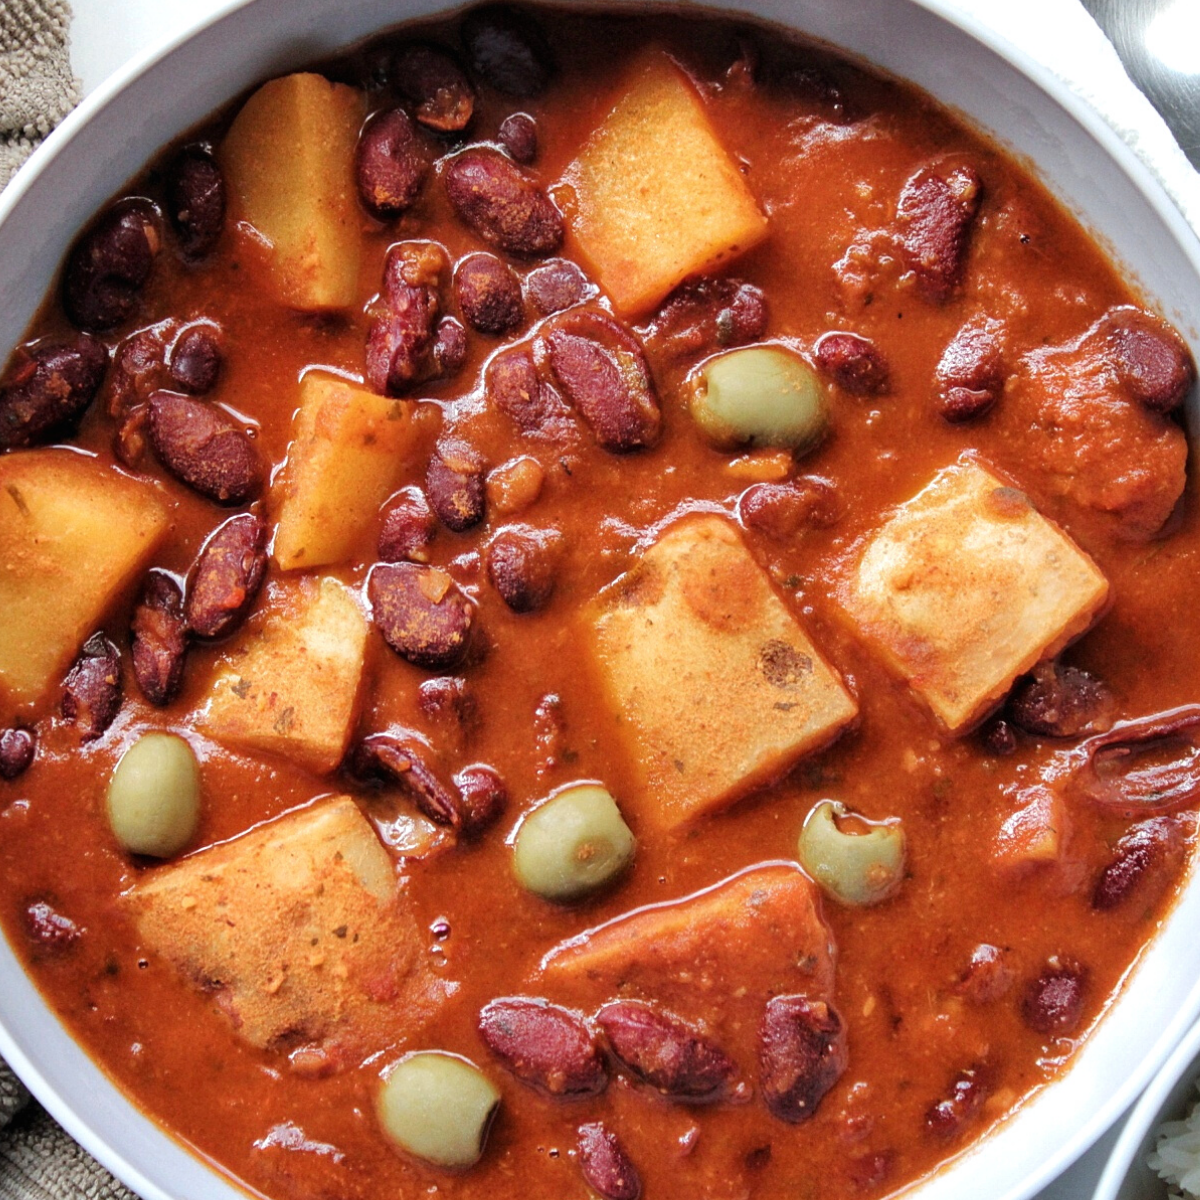 Habichuelas guisadas or Puerto Rican bean stew made with potatoes, beans, and green olives in a bowl.